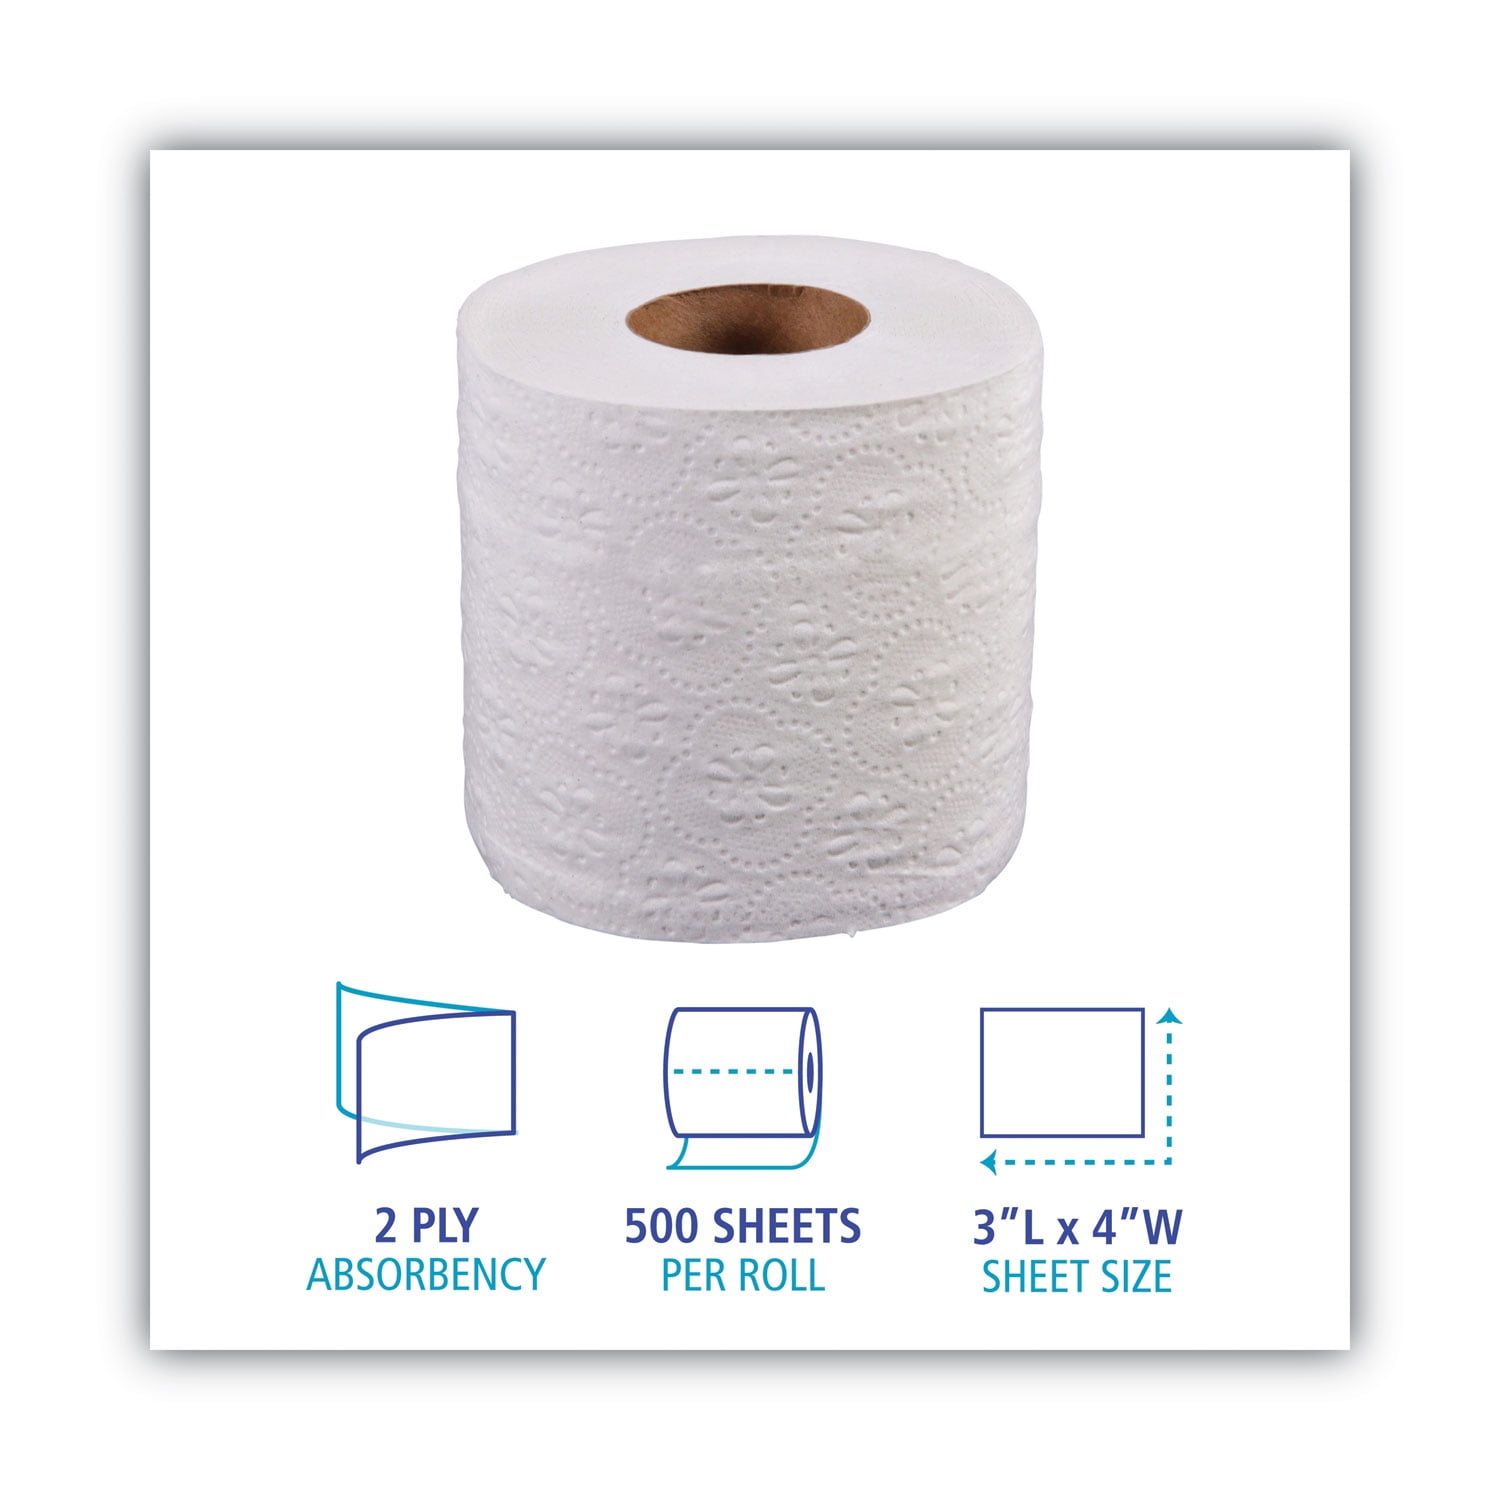 Boardwalk Two-Ply Toilet Tissue, Standard, Septic Safe, White, 4 X 3, 500 Sheets/Roll, 96/Carton - 1